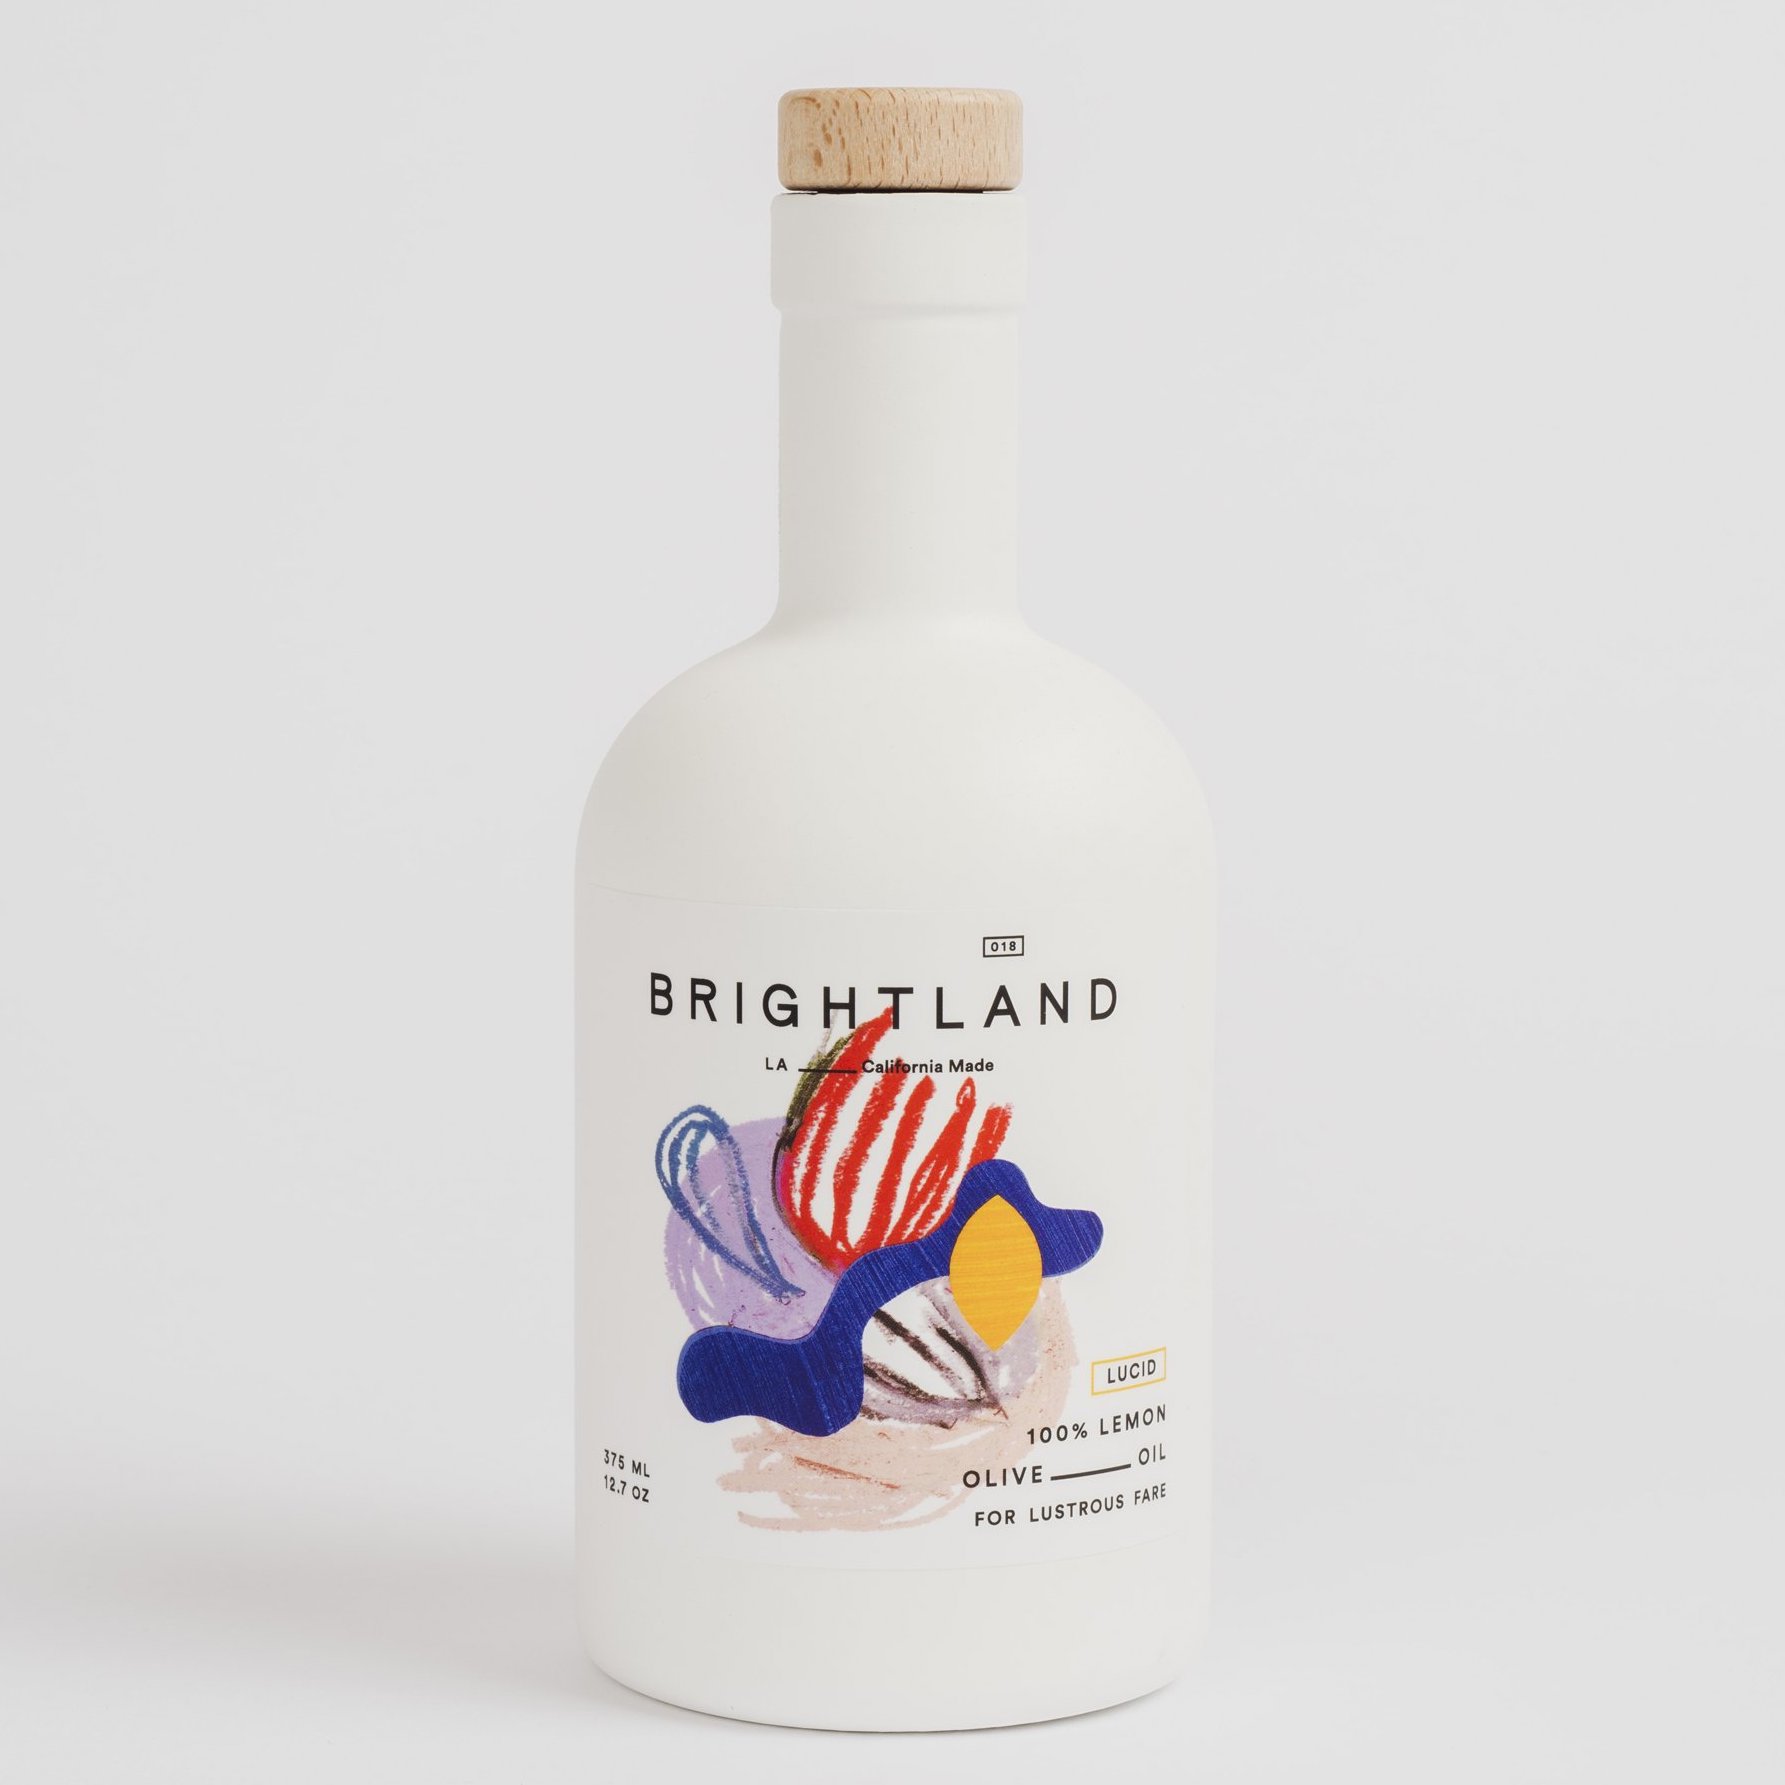 All Sorts Of - Brightland - Olive Oil - Lucid